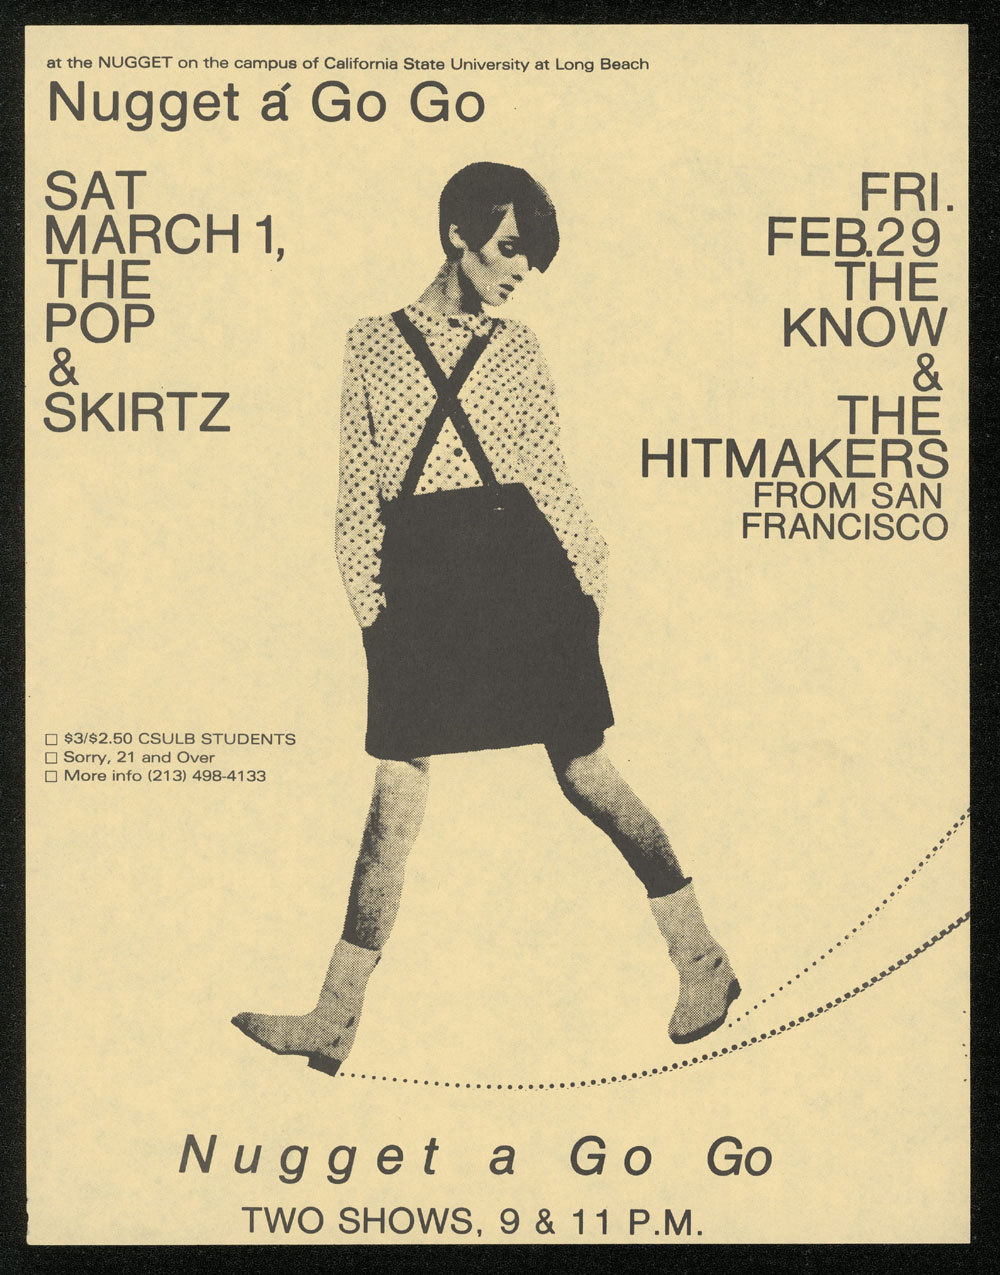 POP w/ Skirtz + KNOW w/ Hitmakers at Nugget A Go Go